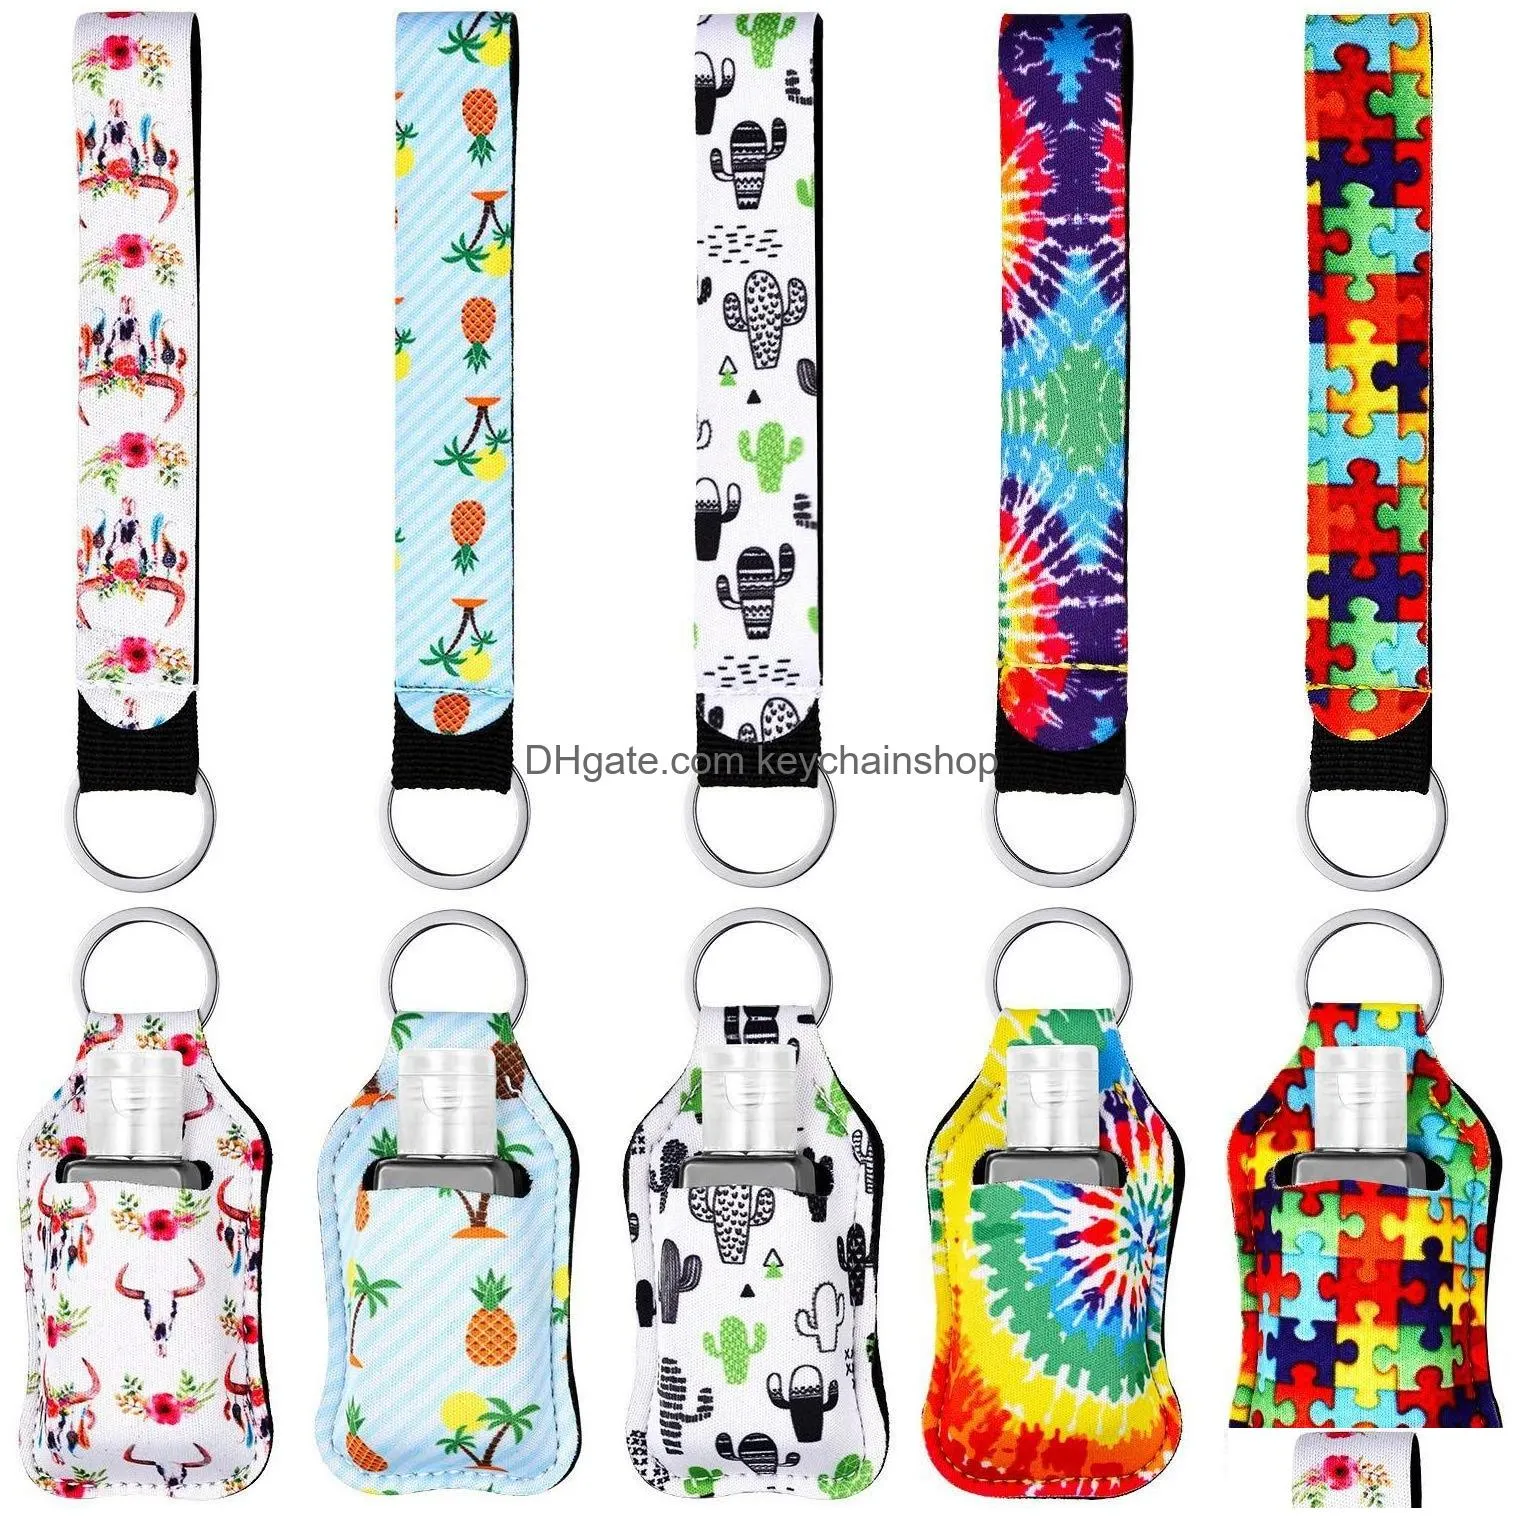 Keychains & Lanyards Pu Leather 30Ml Disposable Hand Sanitizer Bottle Holder Keychain Per Soap Holster Key Rings With Drop Delivery F Dhakx